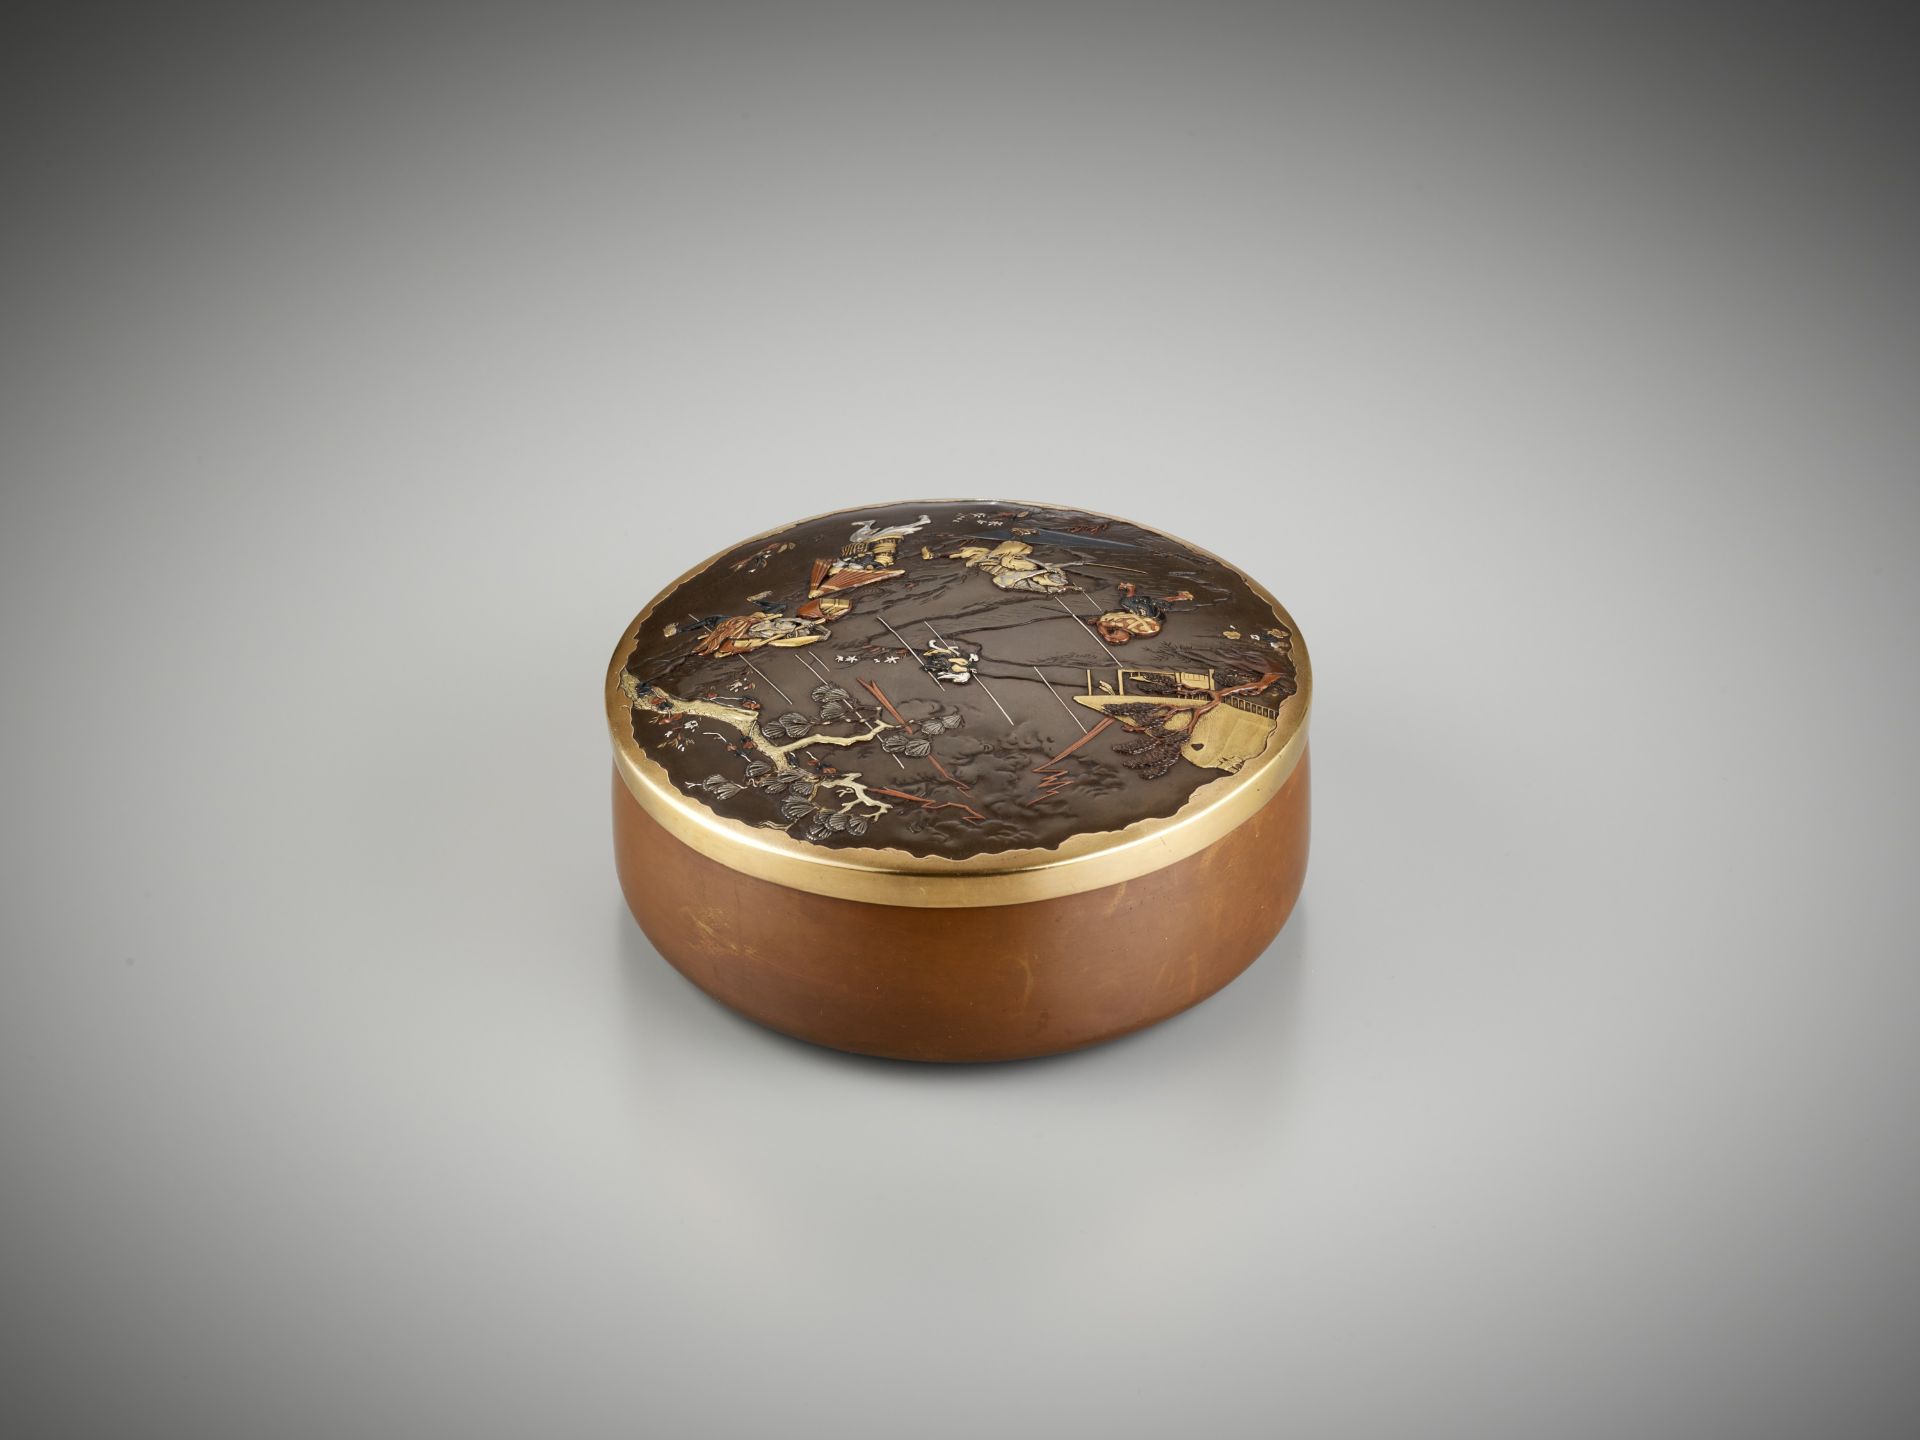 INOUE OF KYOTO: A SUPERB AND LARGE CIRCULAR INLAID BRONZE BOX AND COVER - Image 5 of 9